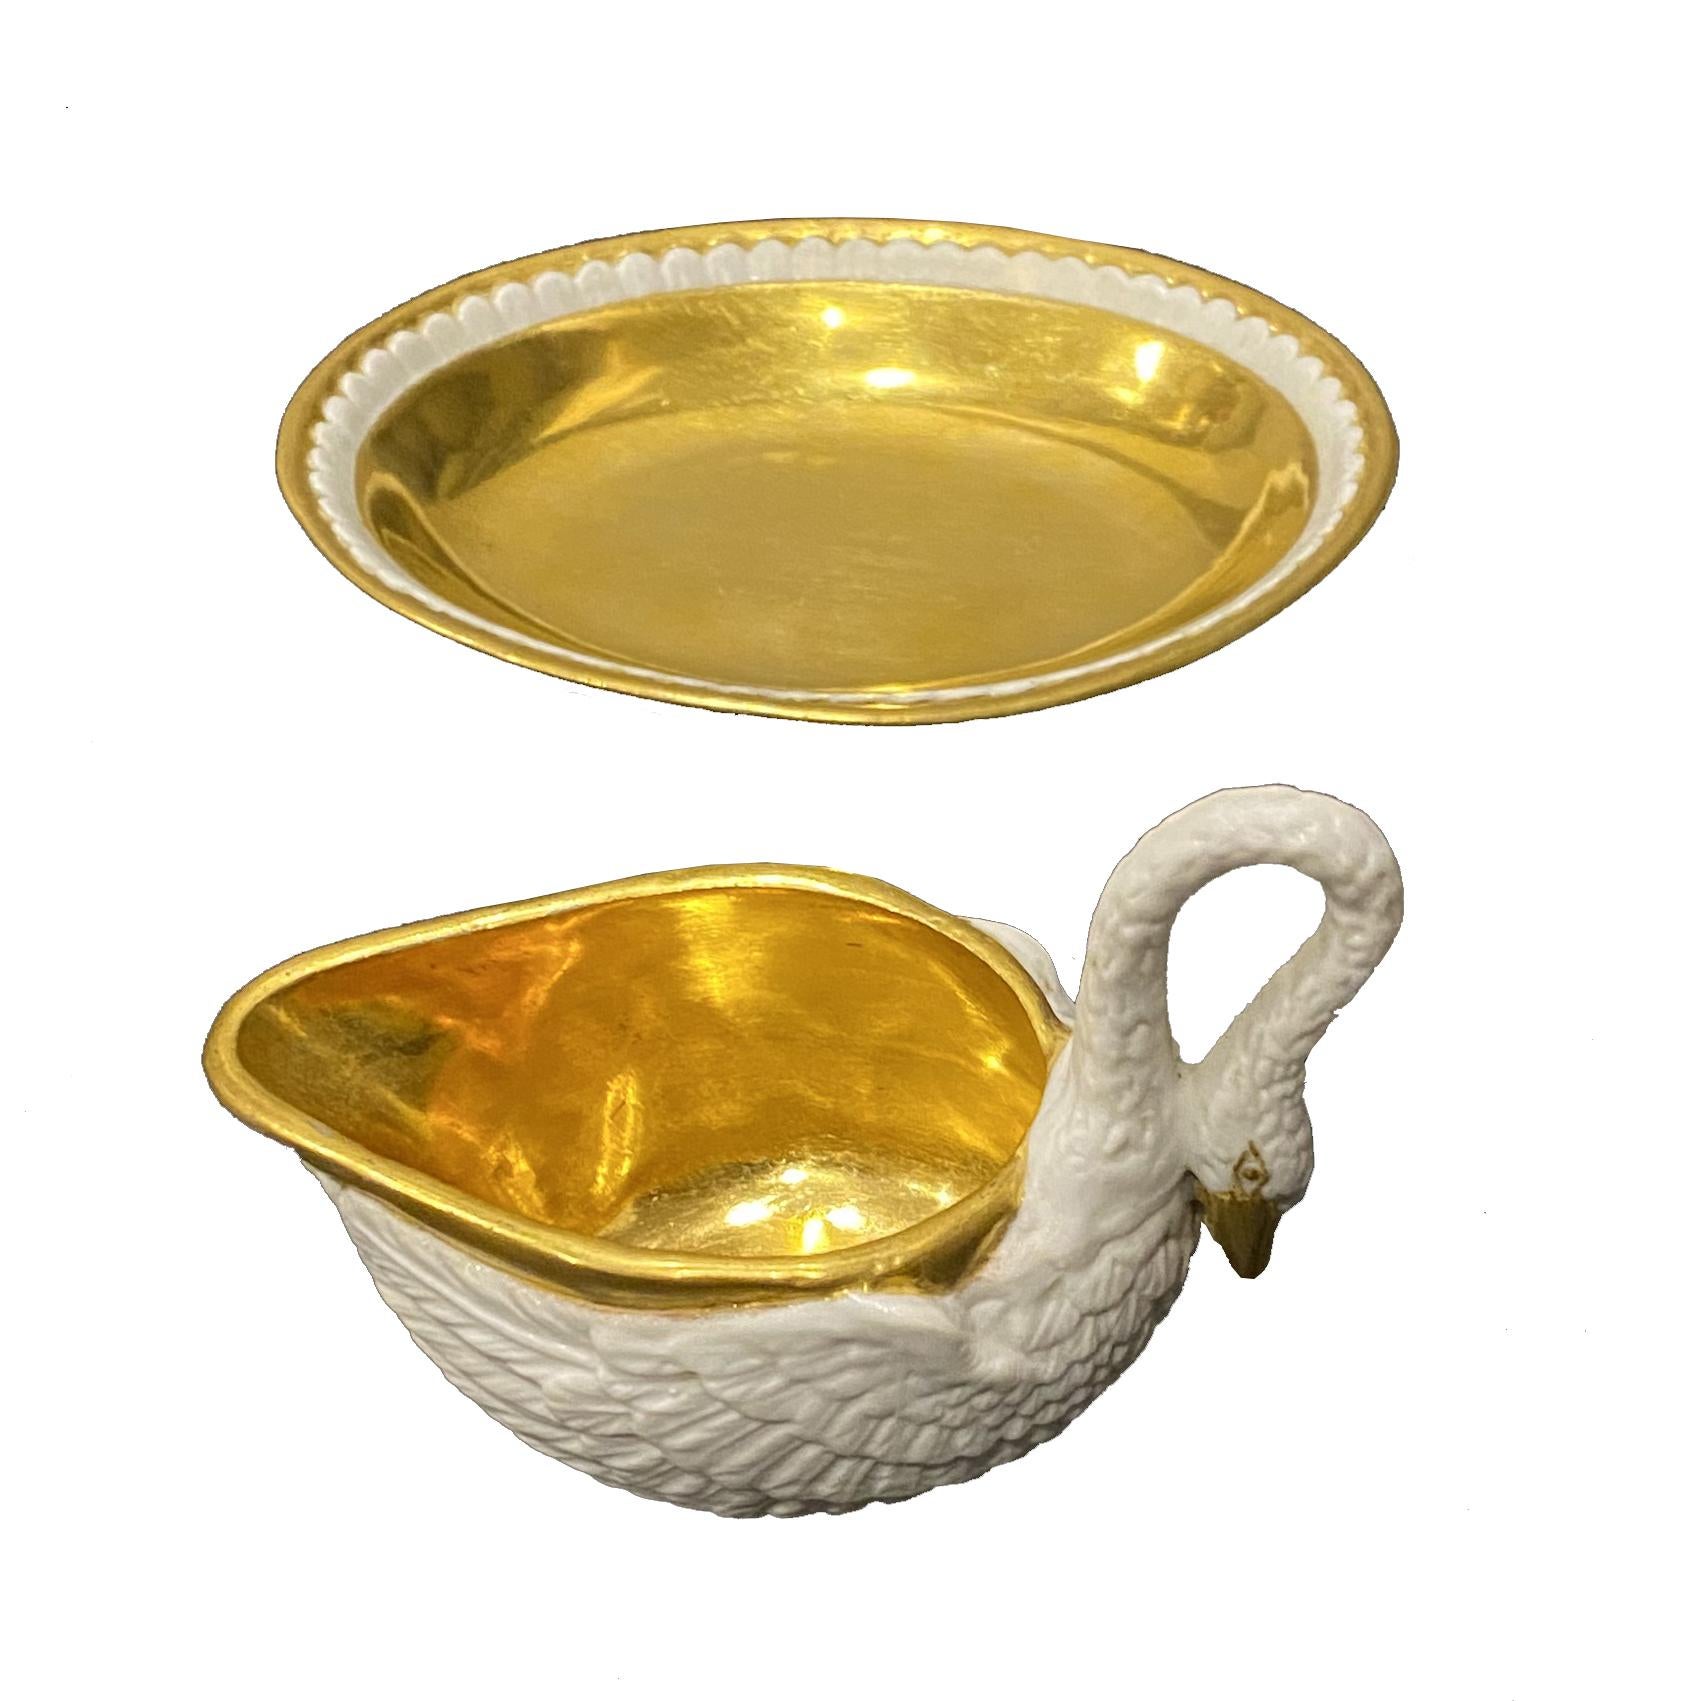 This very rare set of 12 delicate cups swan shape with their saucers is signed by Dagoty, one of the favorite manufacturers of Empress Joséphine's first Napoleon wife well known for her excellent and luxury decorative art taste, 19th century.
Even